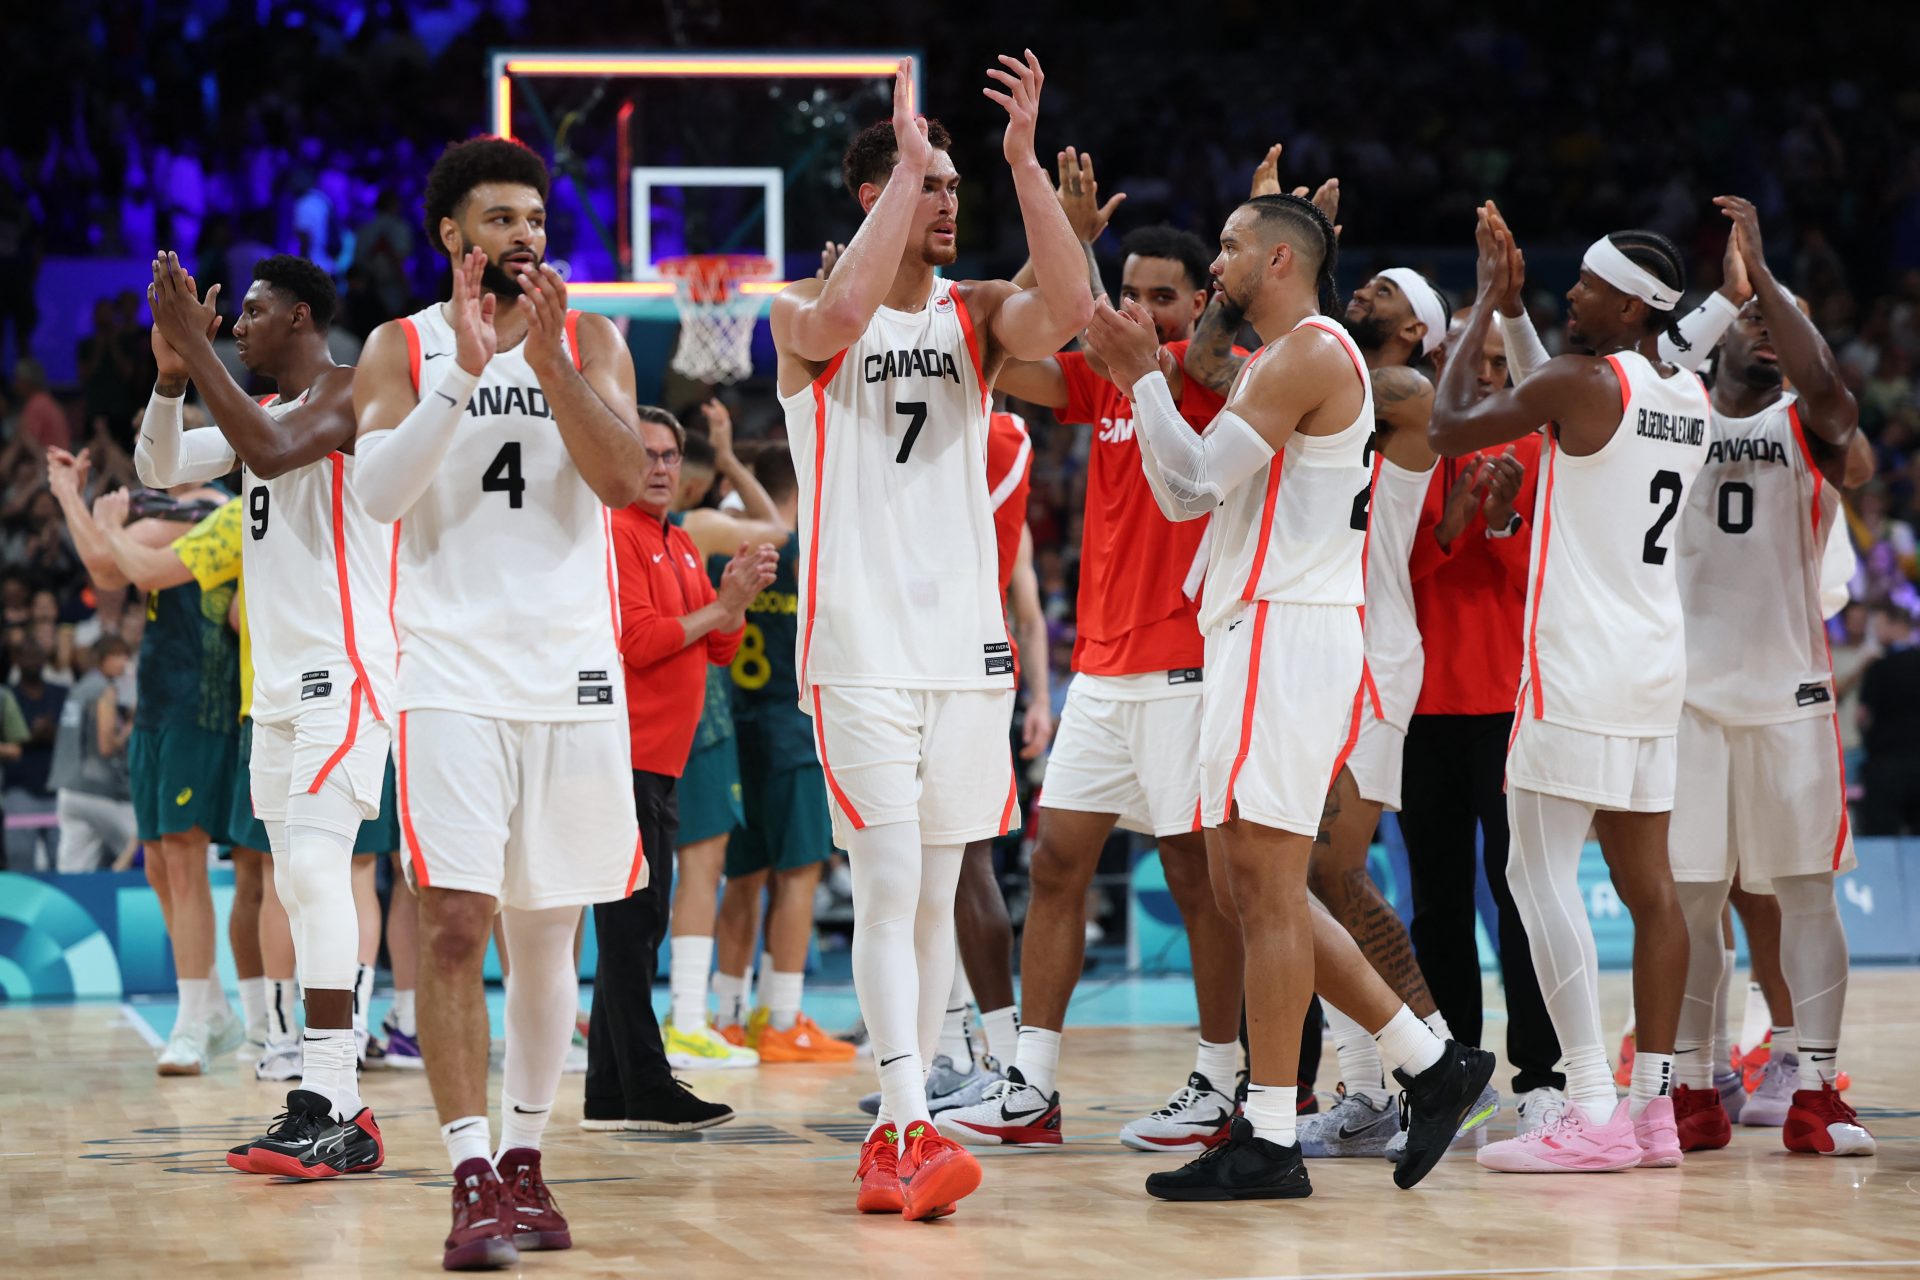 Olympic basketball: Canada's 'Dream Team' looks set to challenge the USA